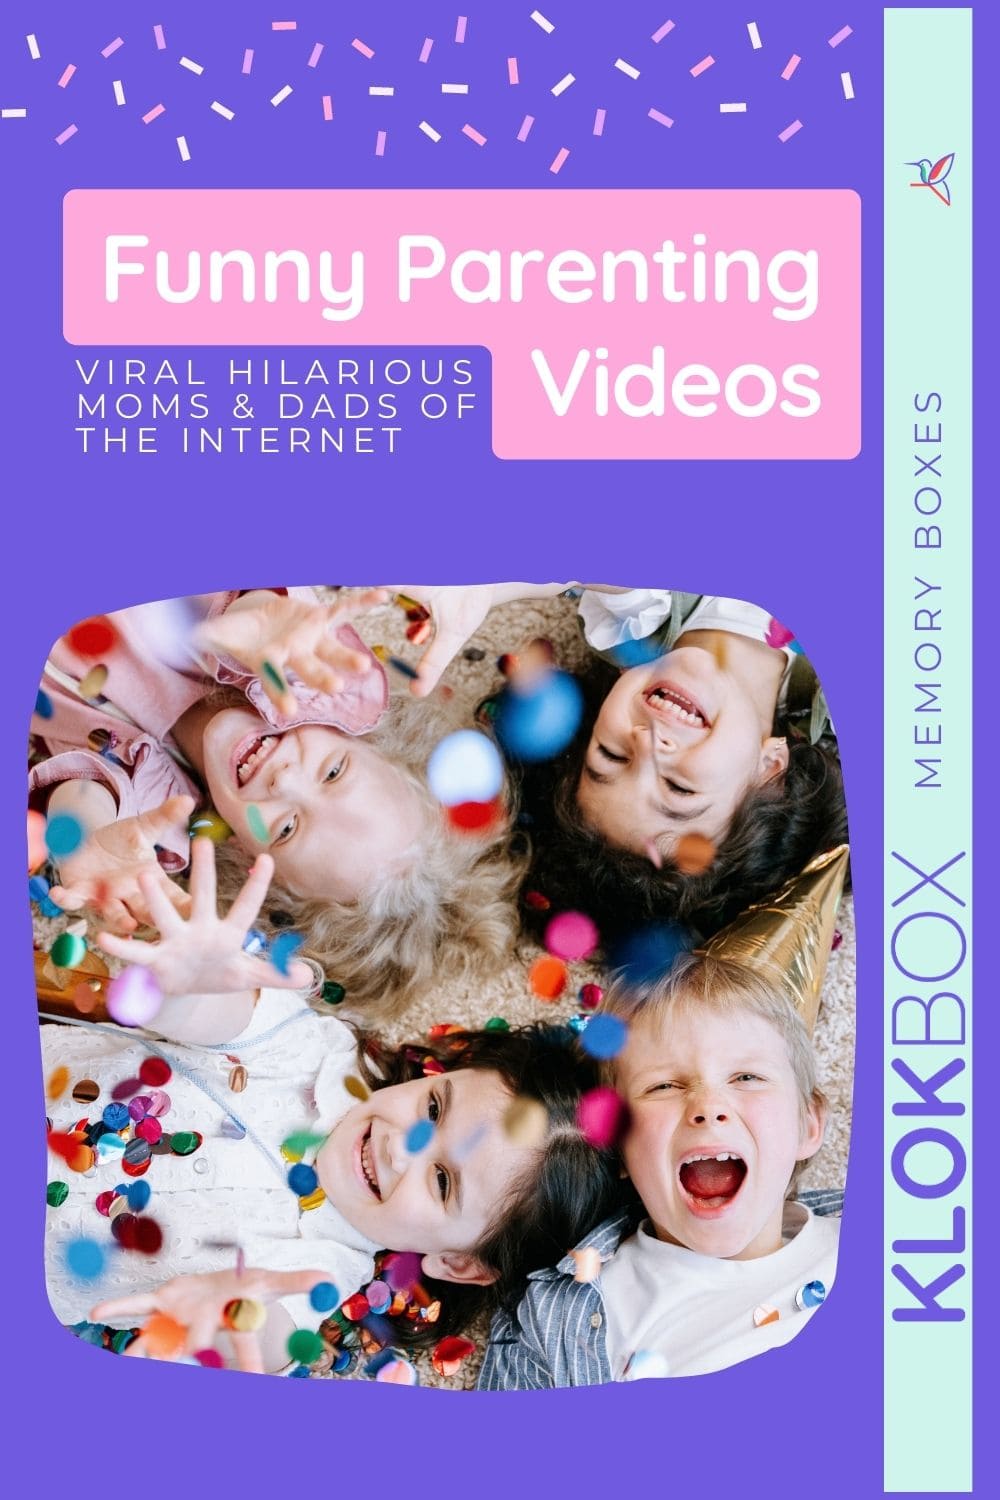 10 Funny Parenting Videos - Viral hilarious moms & dads of the Internet